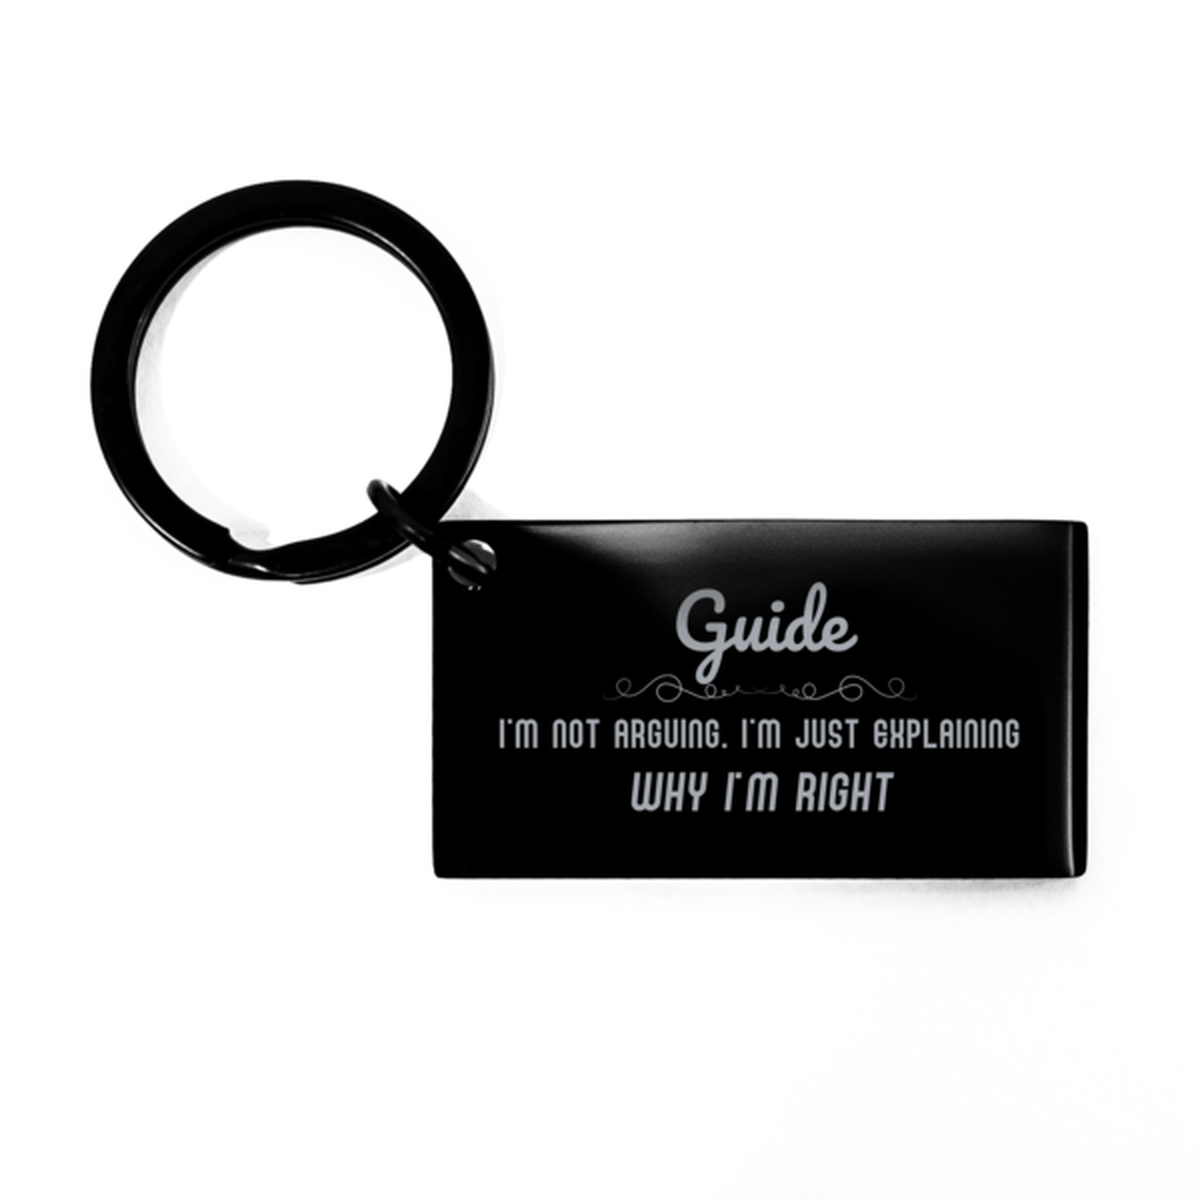 Guide I'm not Arguing. I'm Just Explaining Why I'm RIGHT Keychain, Funny Saying Quote Guide Gifts For Guide Graduation Birthday Christmas Gifts for Men Women Coworker